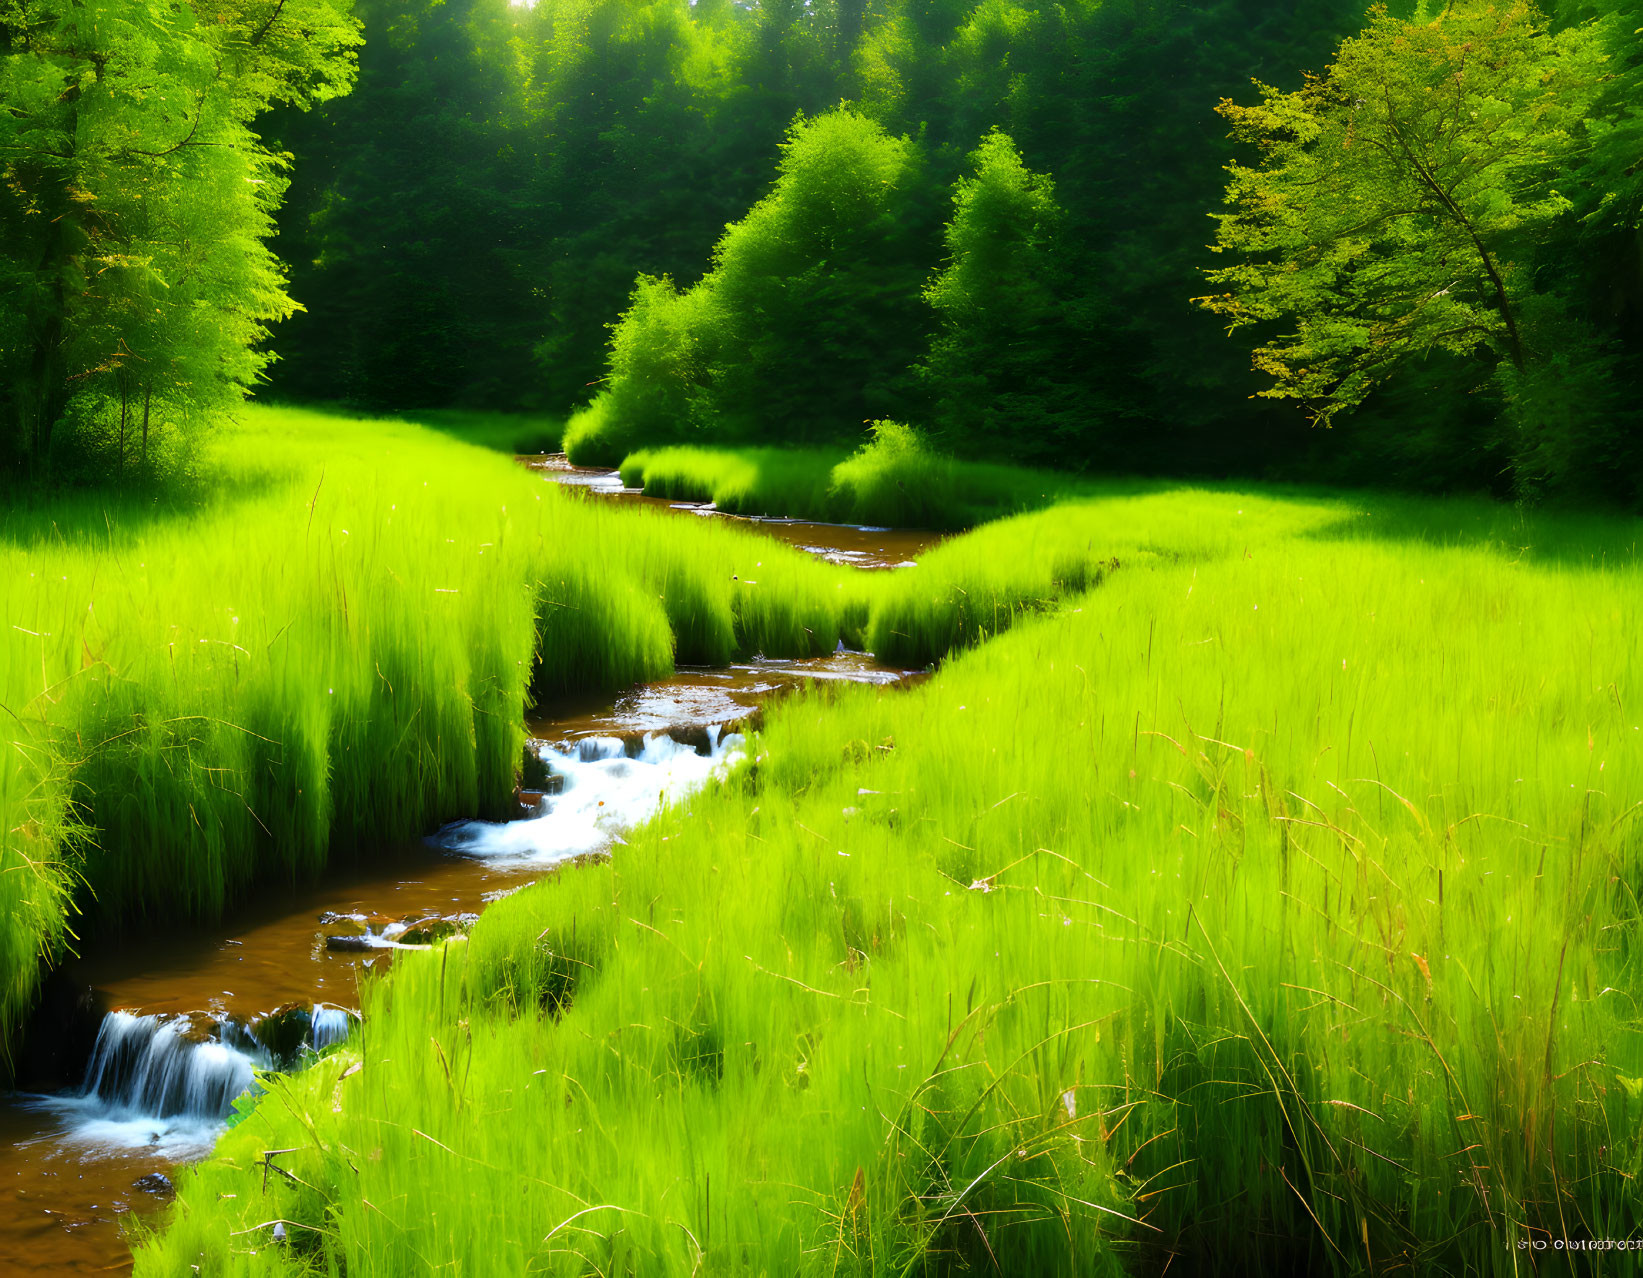 Tranquil stream in lush green meadow with trees and sunbeams